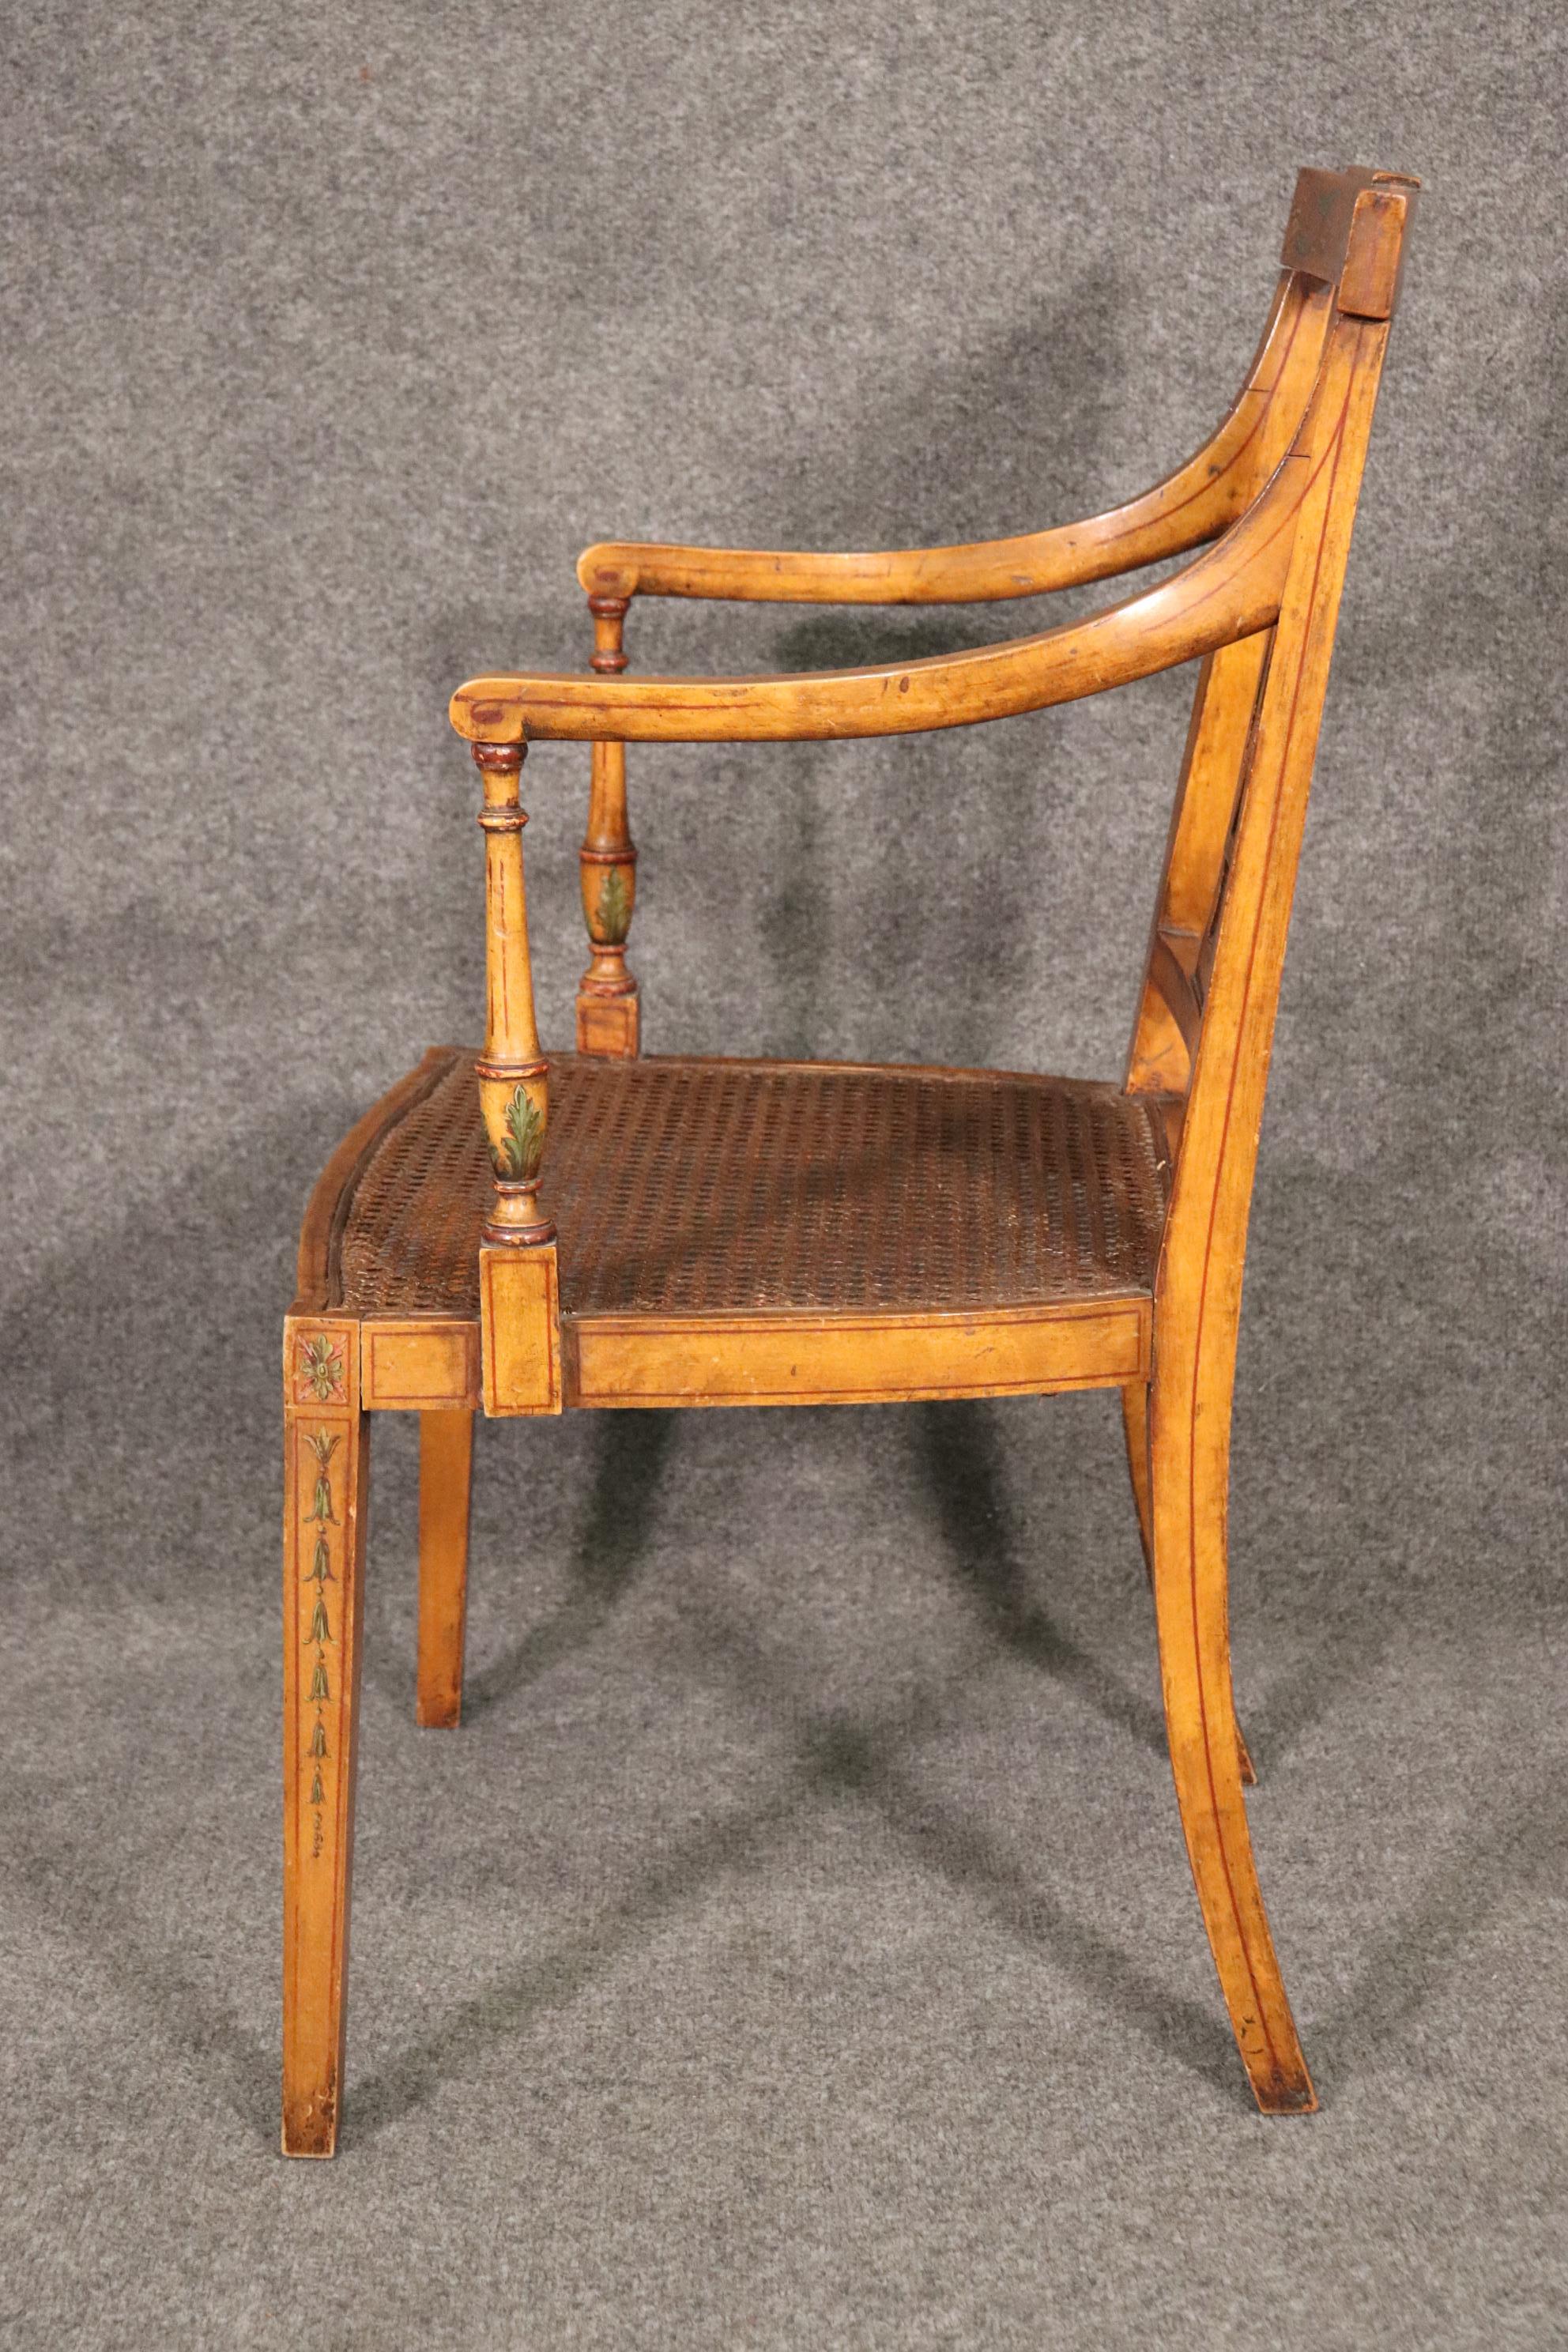 Early 20th Century Fine Quality Paint Decorated English Satinwood Adams Cane Armchair Circa 1920 For Sale